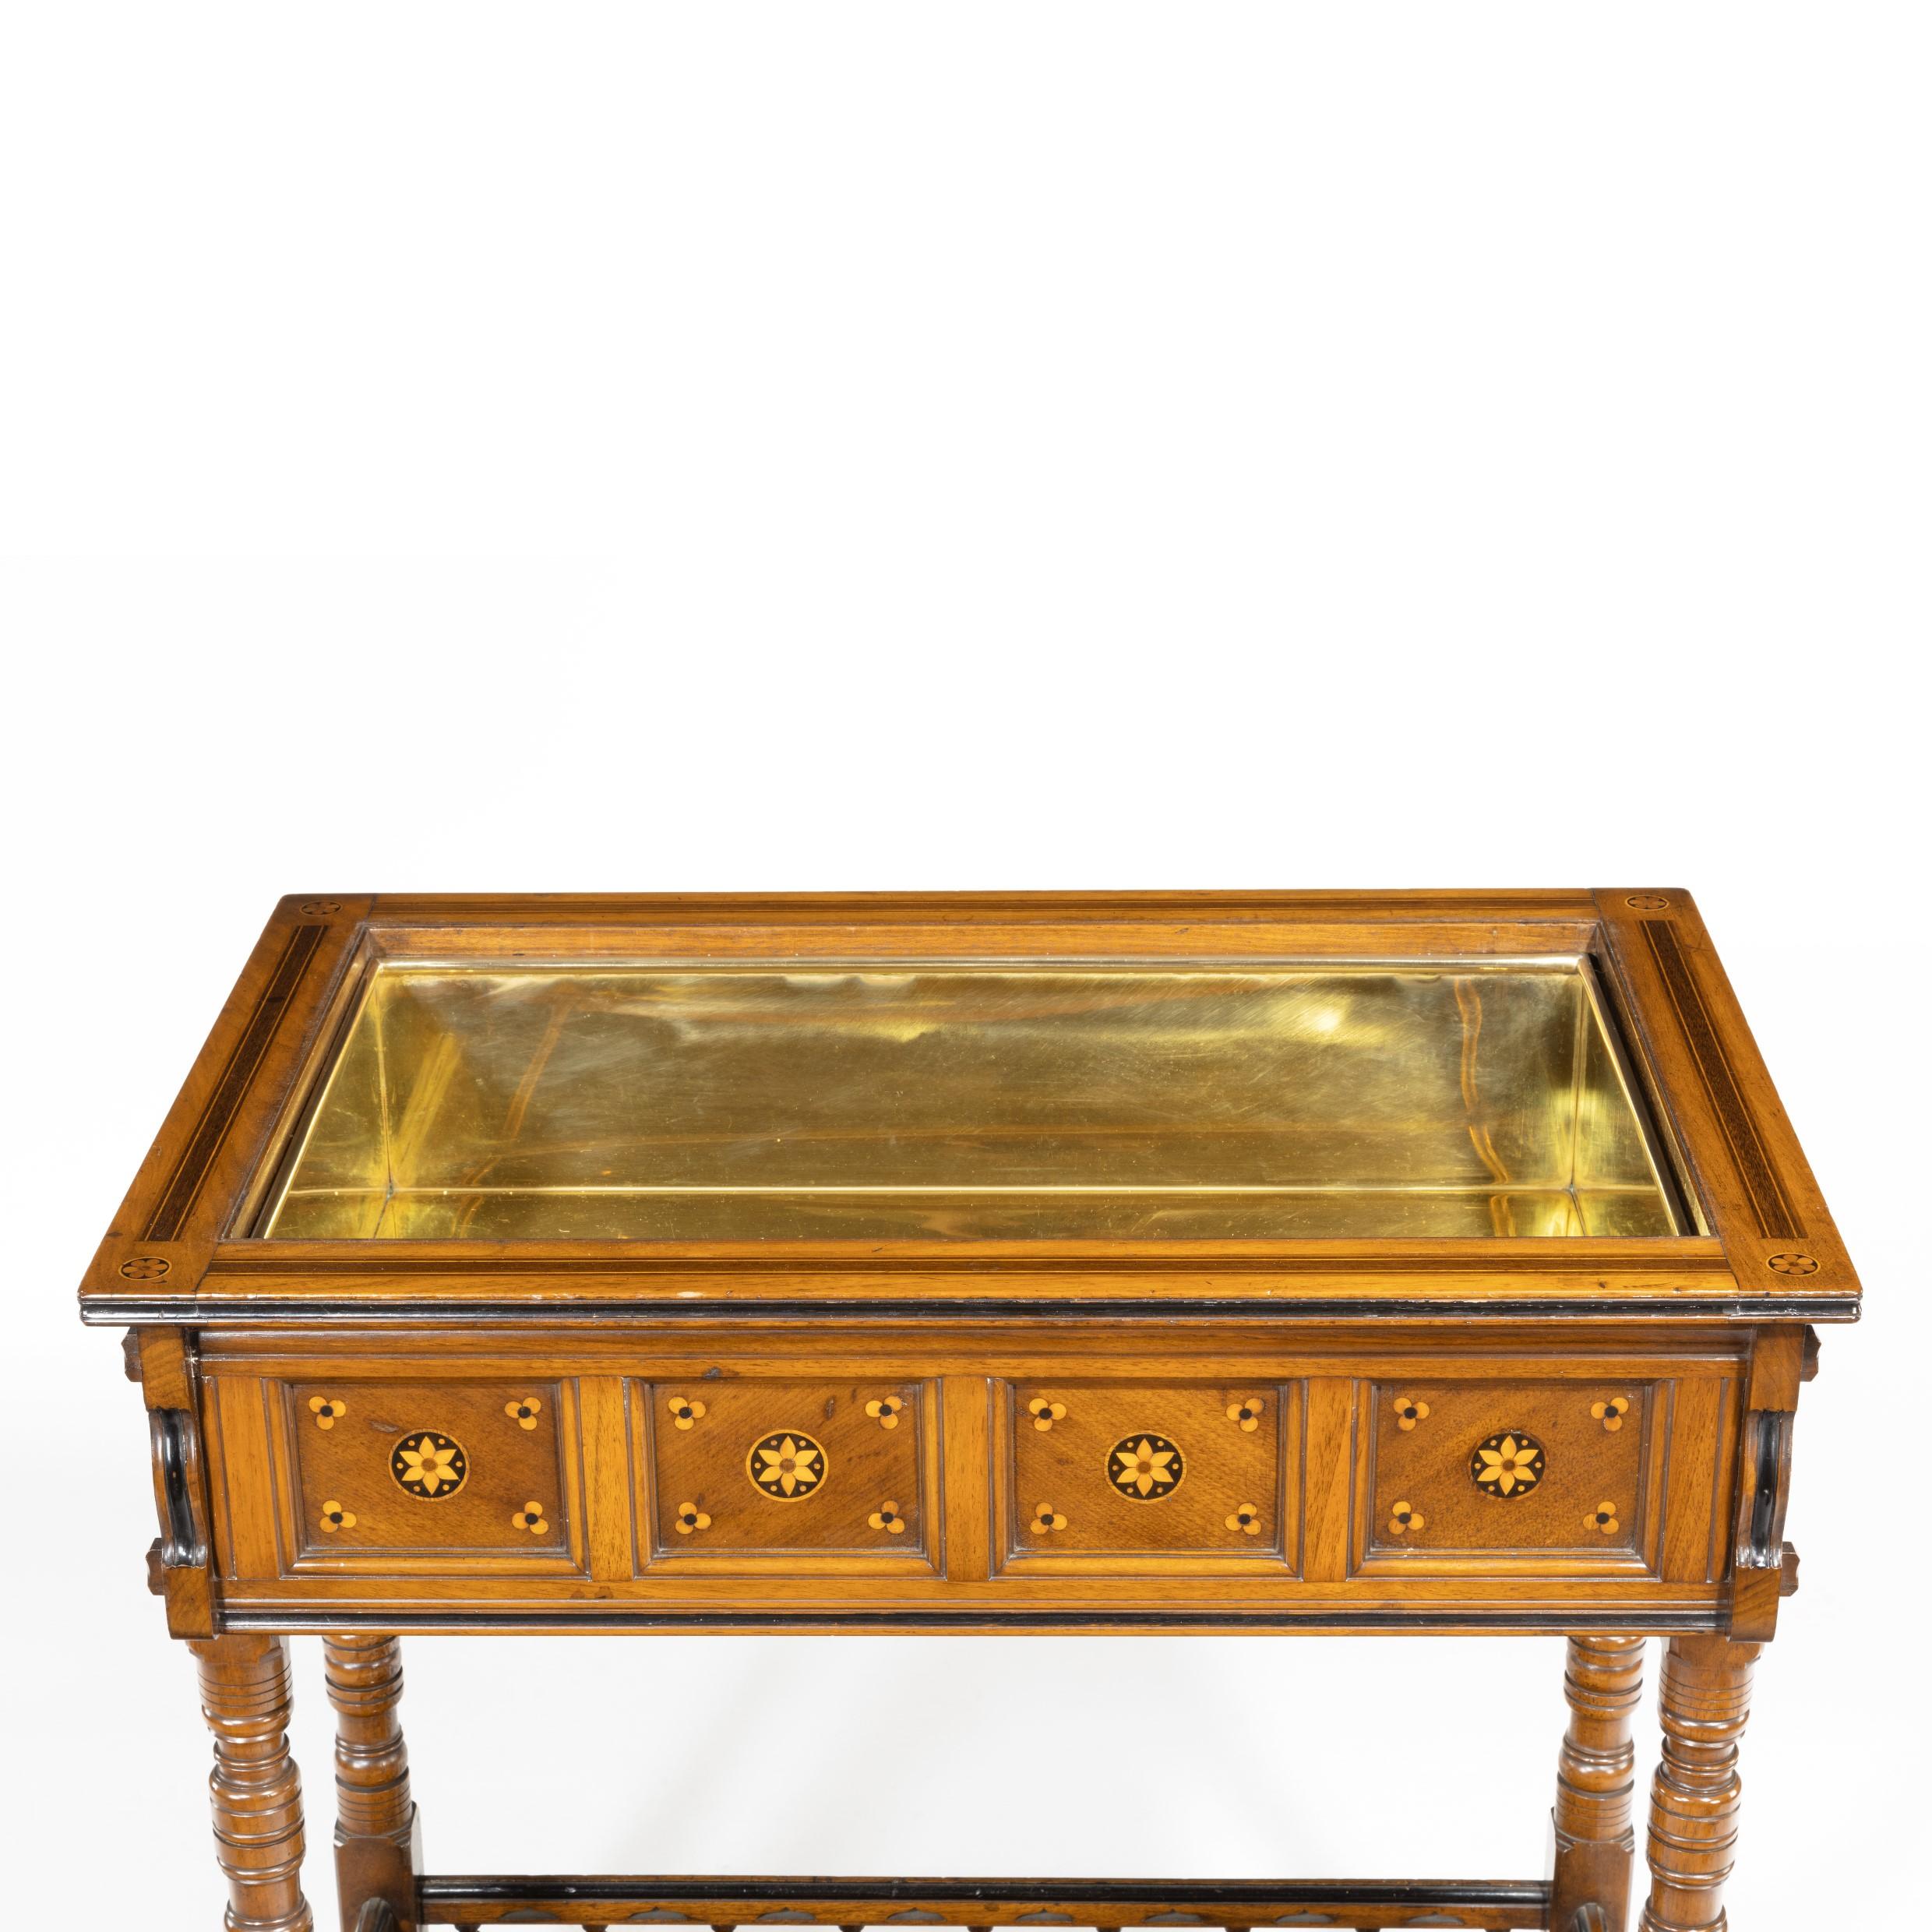 Late 19th Century Walnut Side Table/Jardinière by Gillows Probably after Augustus Pugin